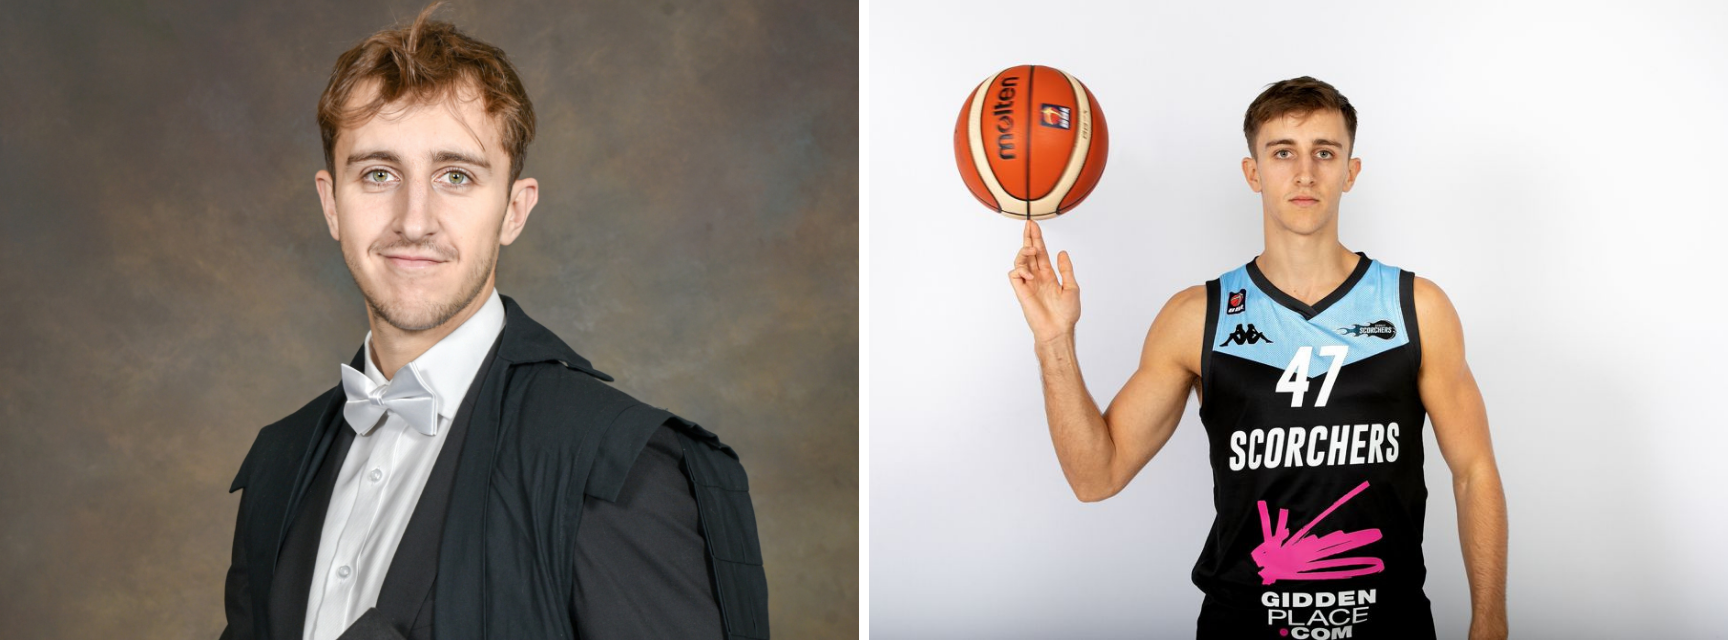 A profile picture of Alex, alongside a picture of him spinning a basketball on his finger